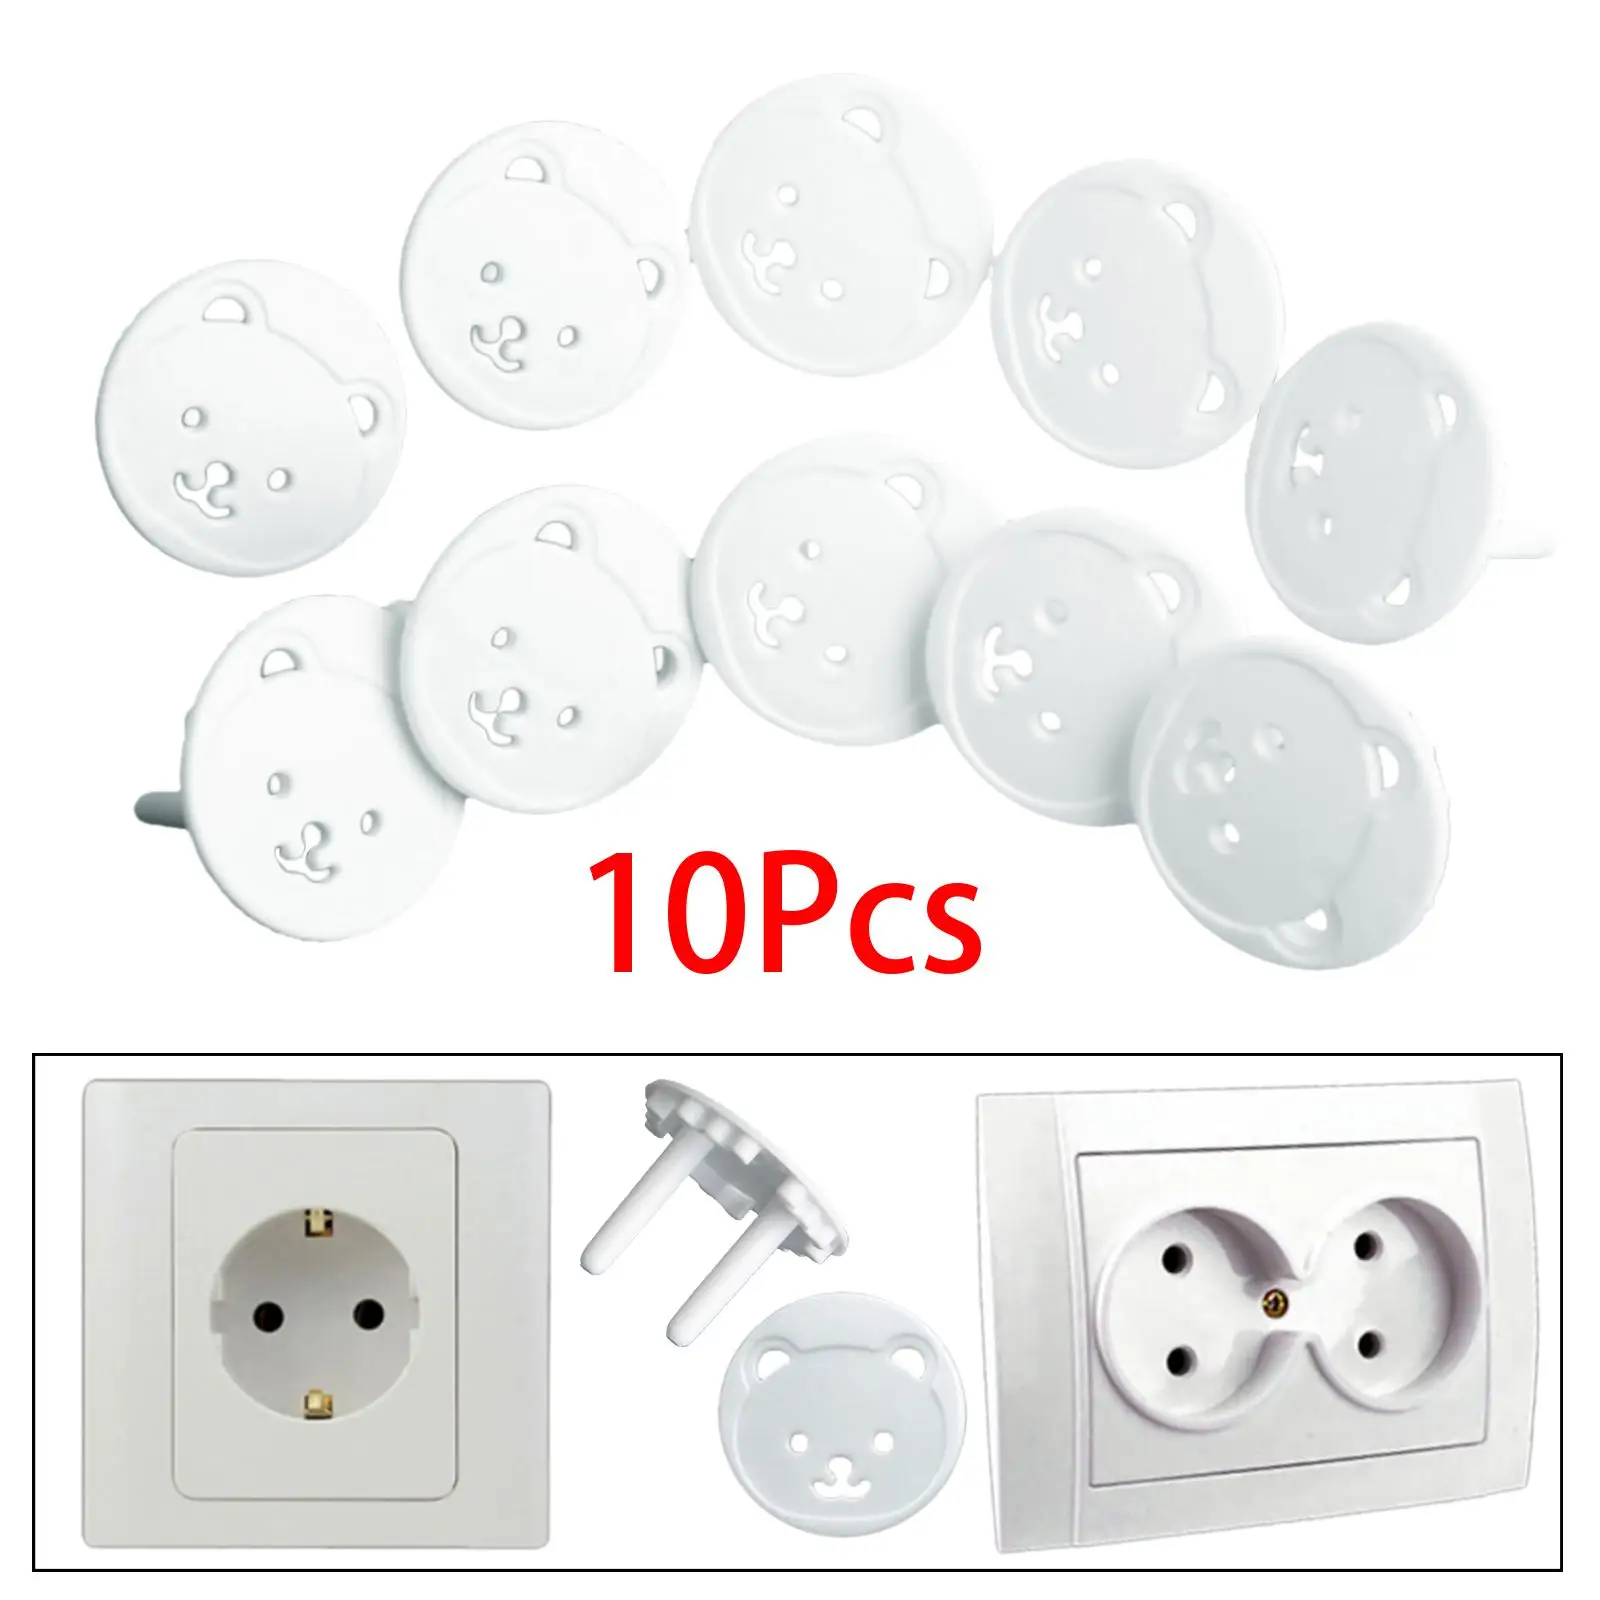 10Pcs Outlet Covers Baby Proofing Electric Plug Protectors Wall Socket Protector for Wall Kids